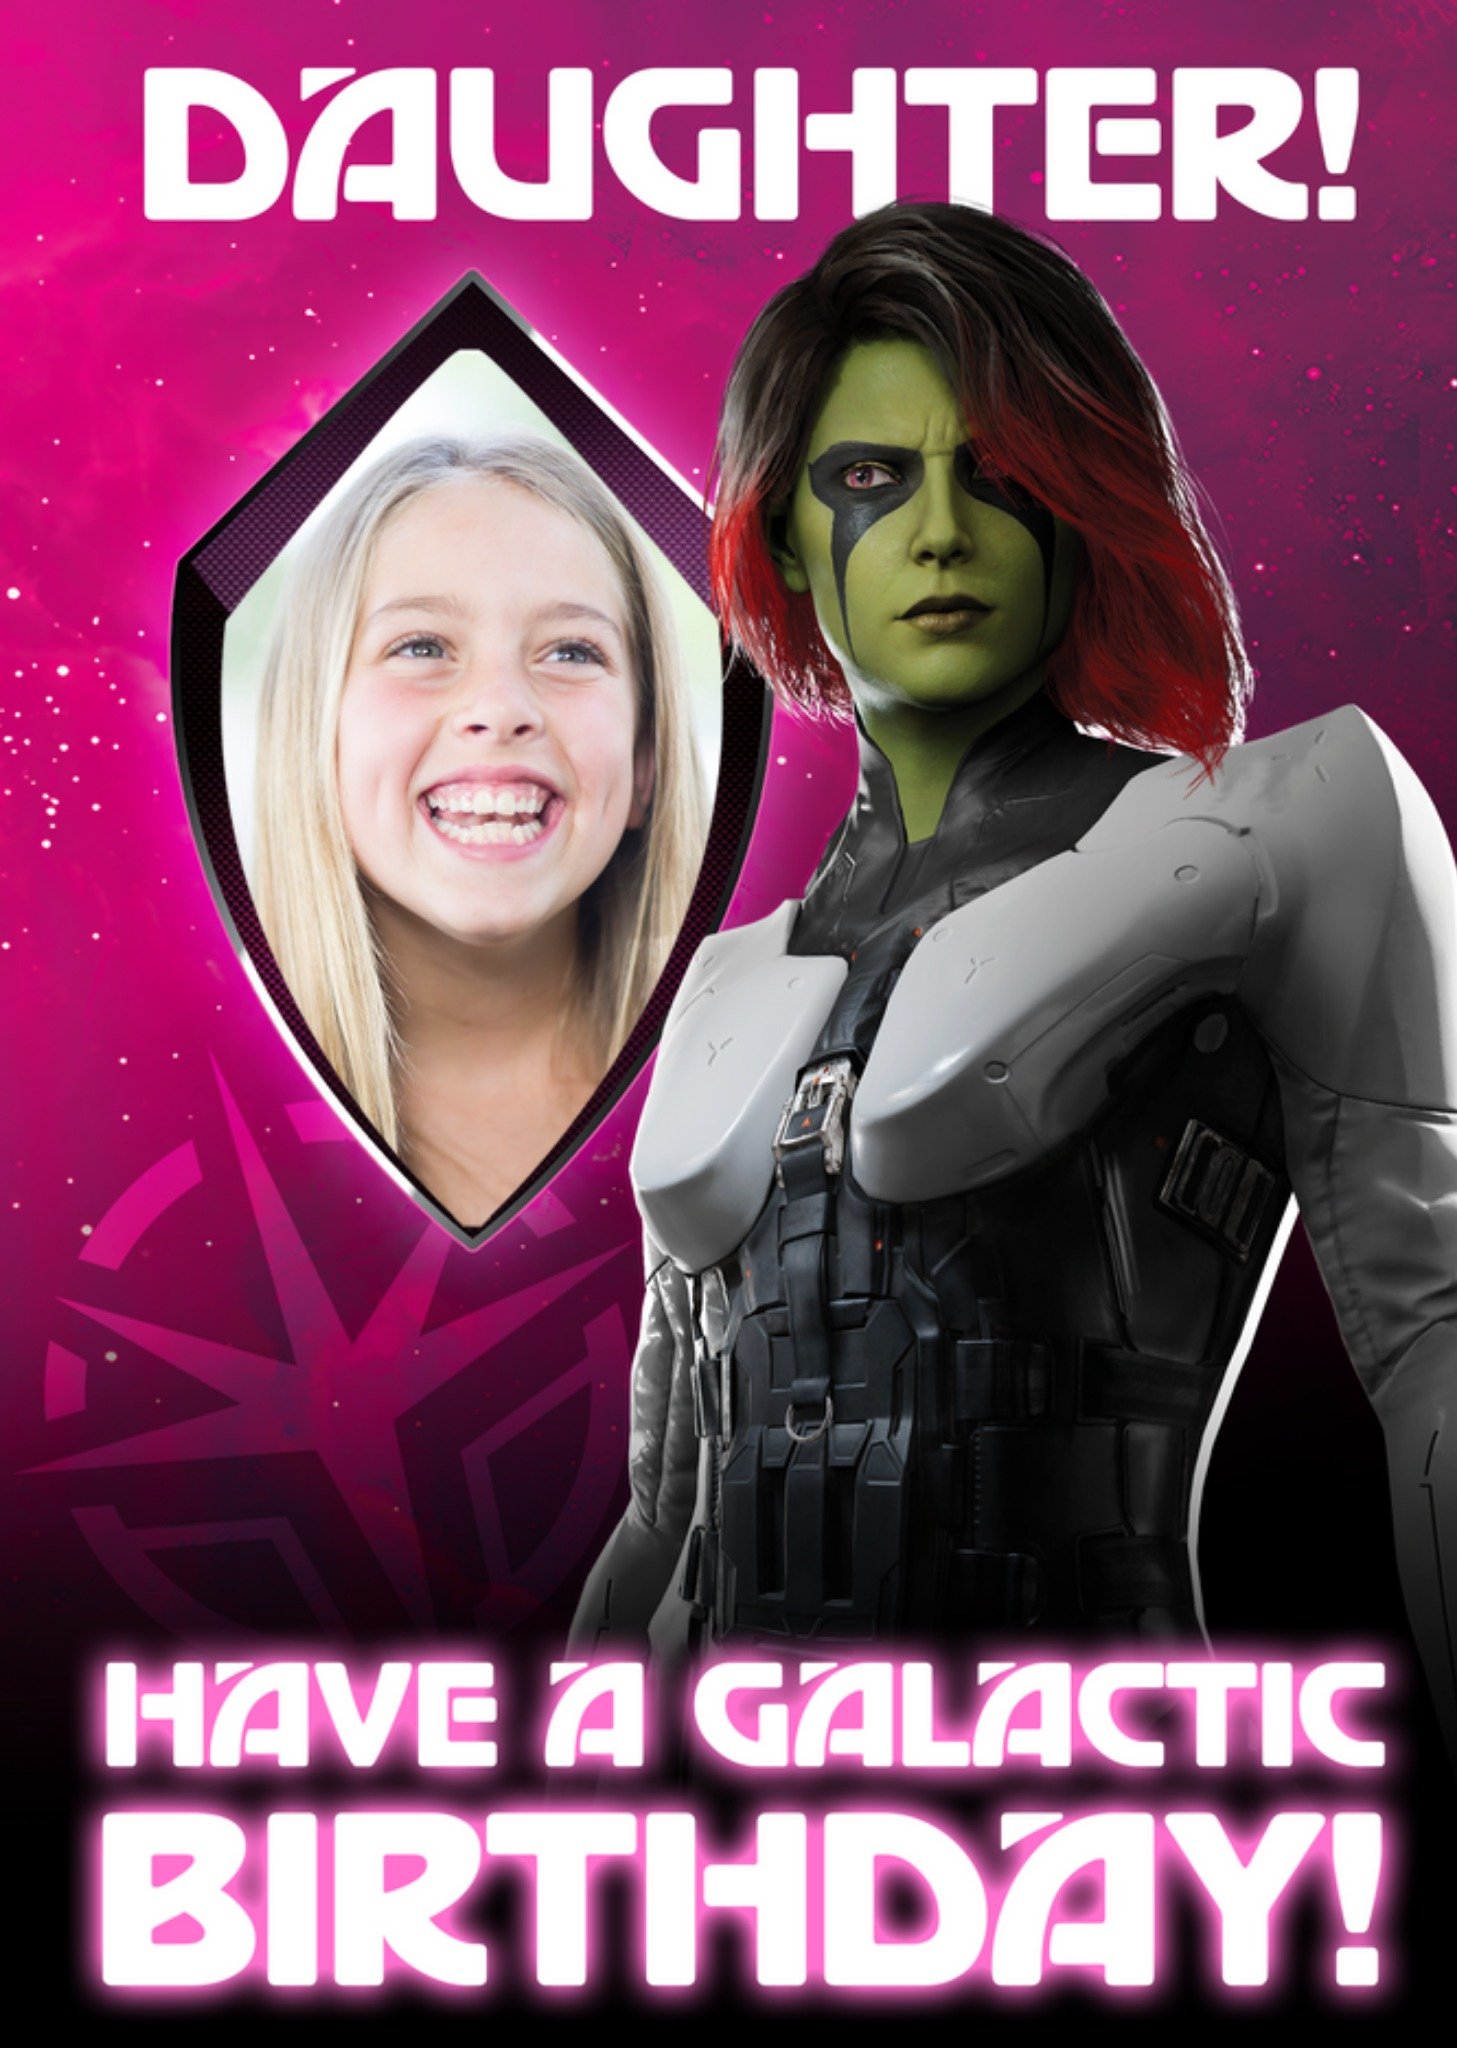 Disney Guardians Of The Galaxy Daughter Galactic Birthday Photo Upload Birthday Card, Large